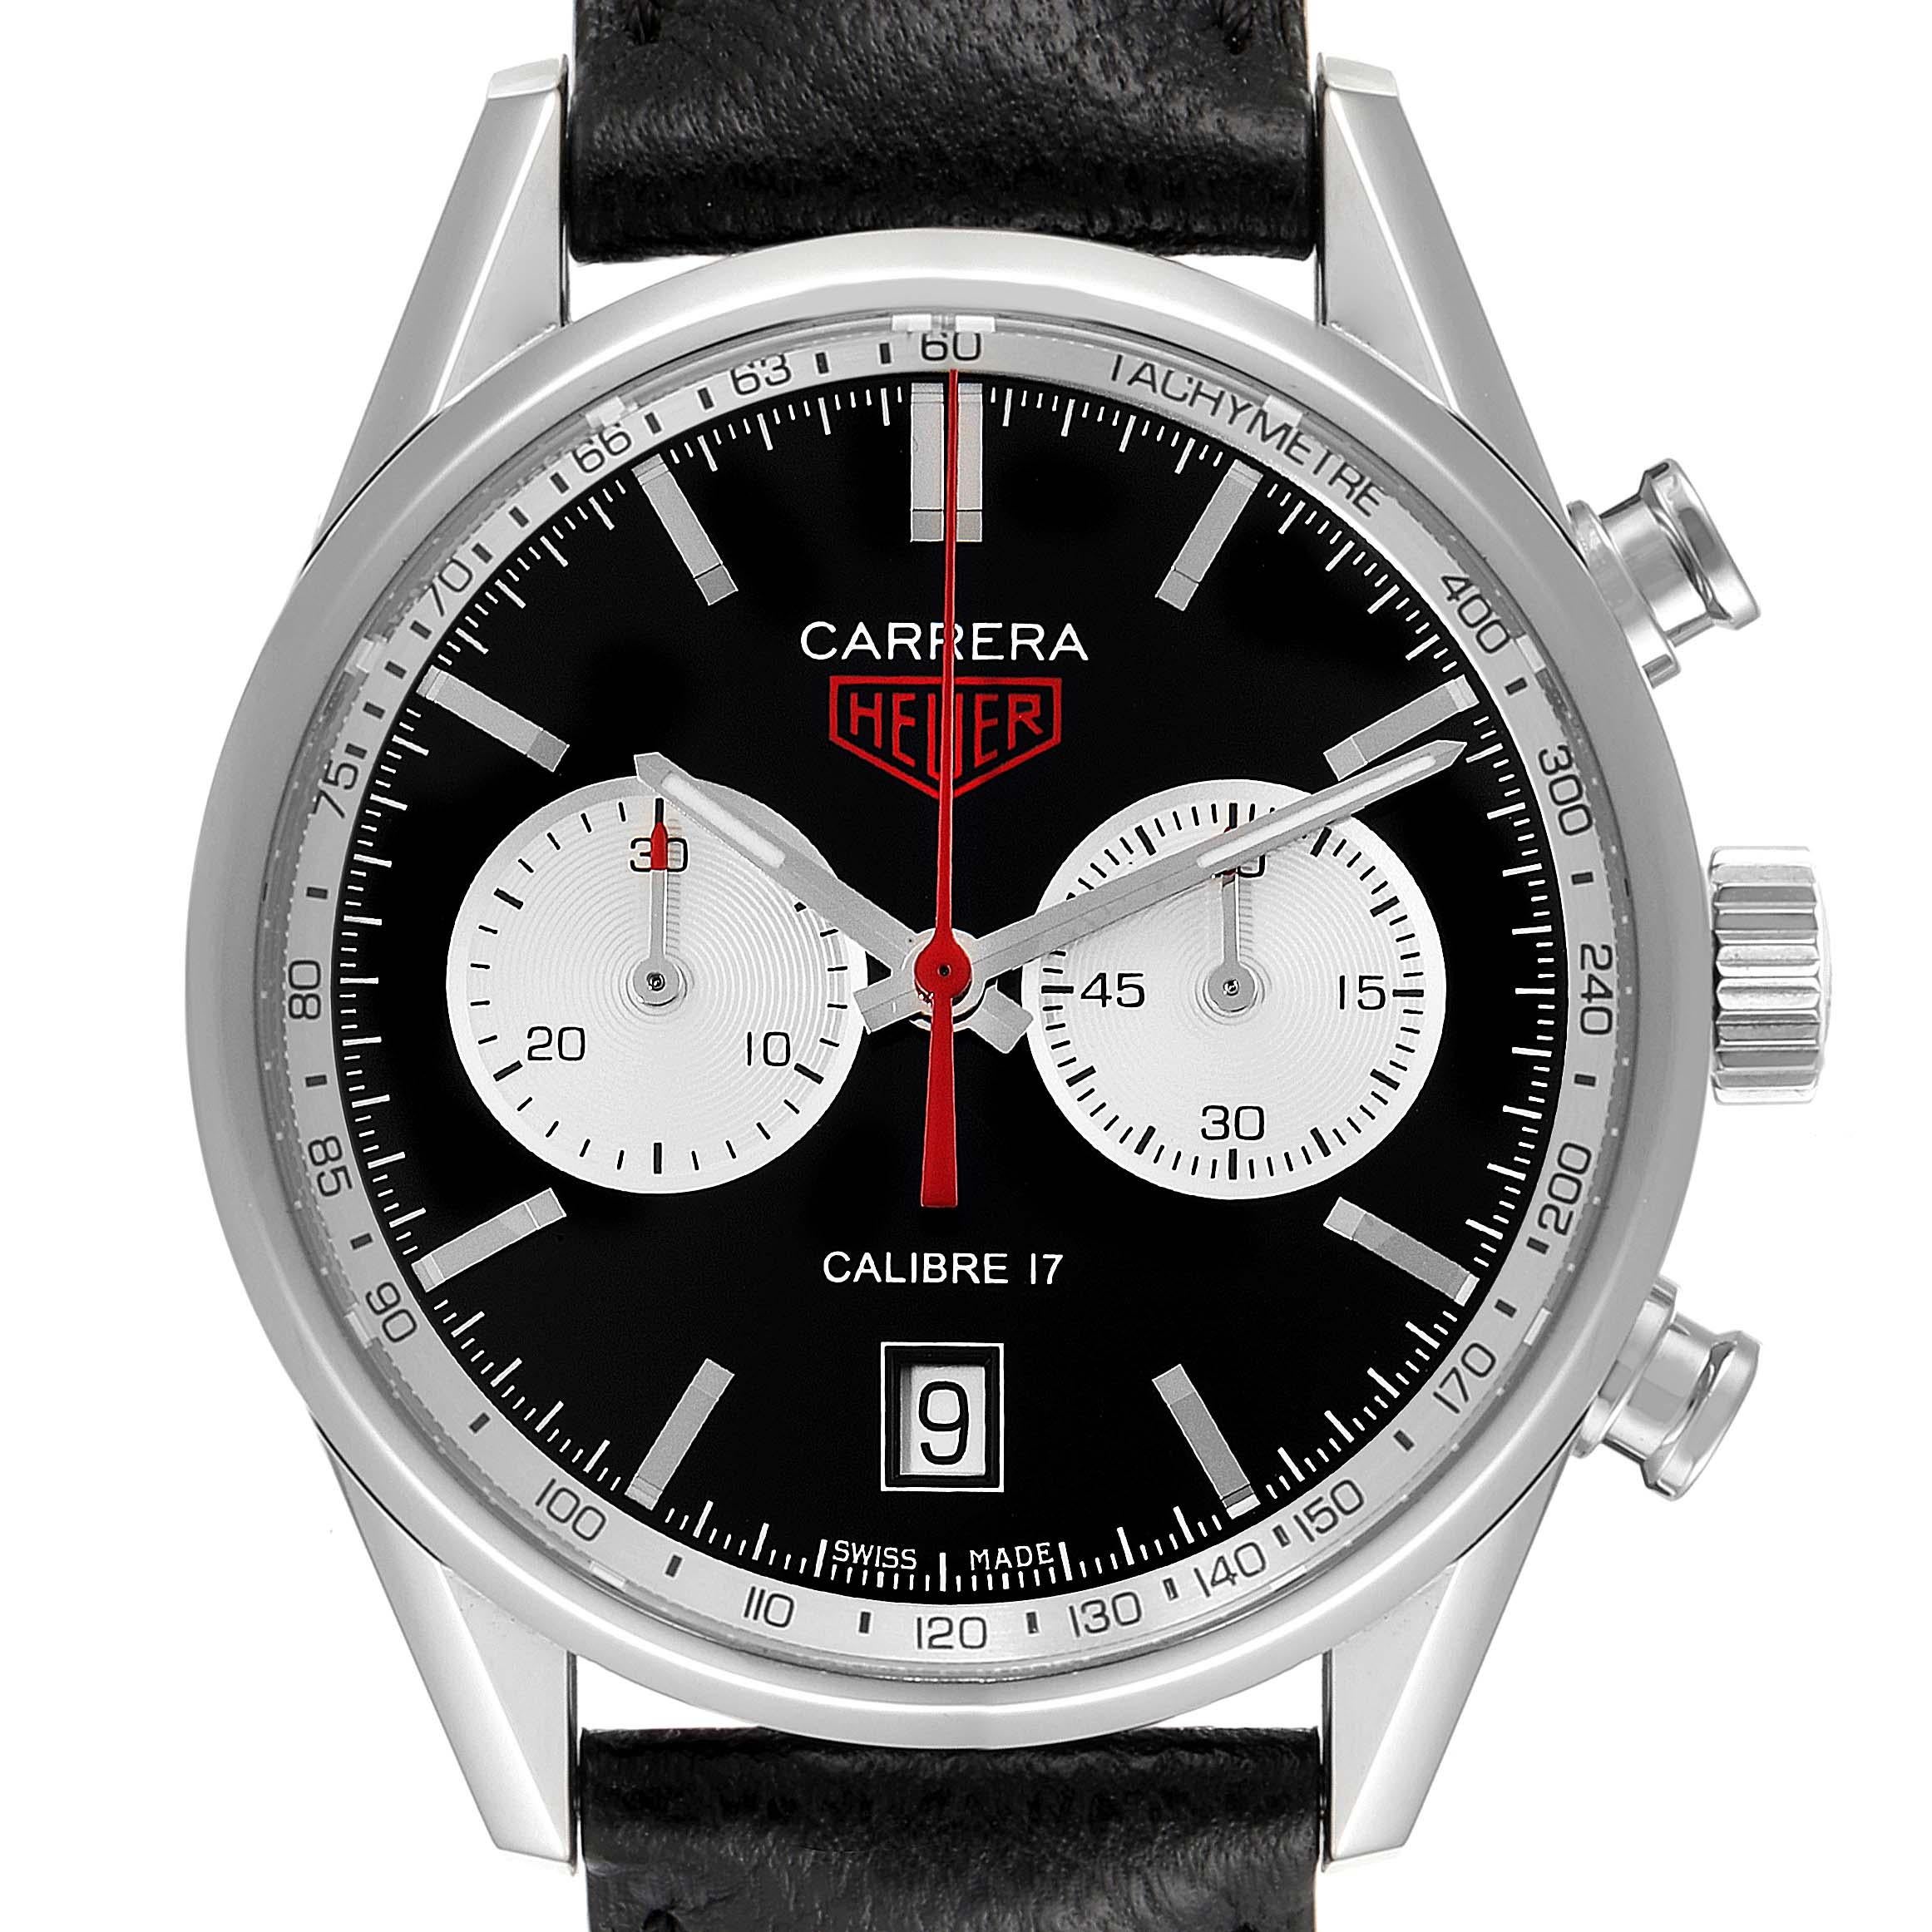 Tag Heuer Carrera Heritage Panda Dial Chronograph Steel Mens Watch CV211D. Automatic self-winding chronograph movement. Stainless steel case 41.0 mm. Tag Heuer logo on a crown. Stainless steel smooth bezel. Scratch resistant sapphire crystal. Black